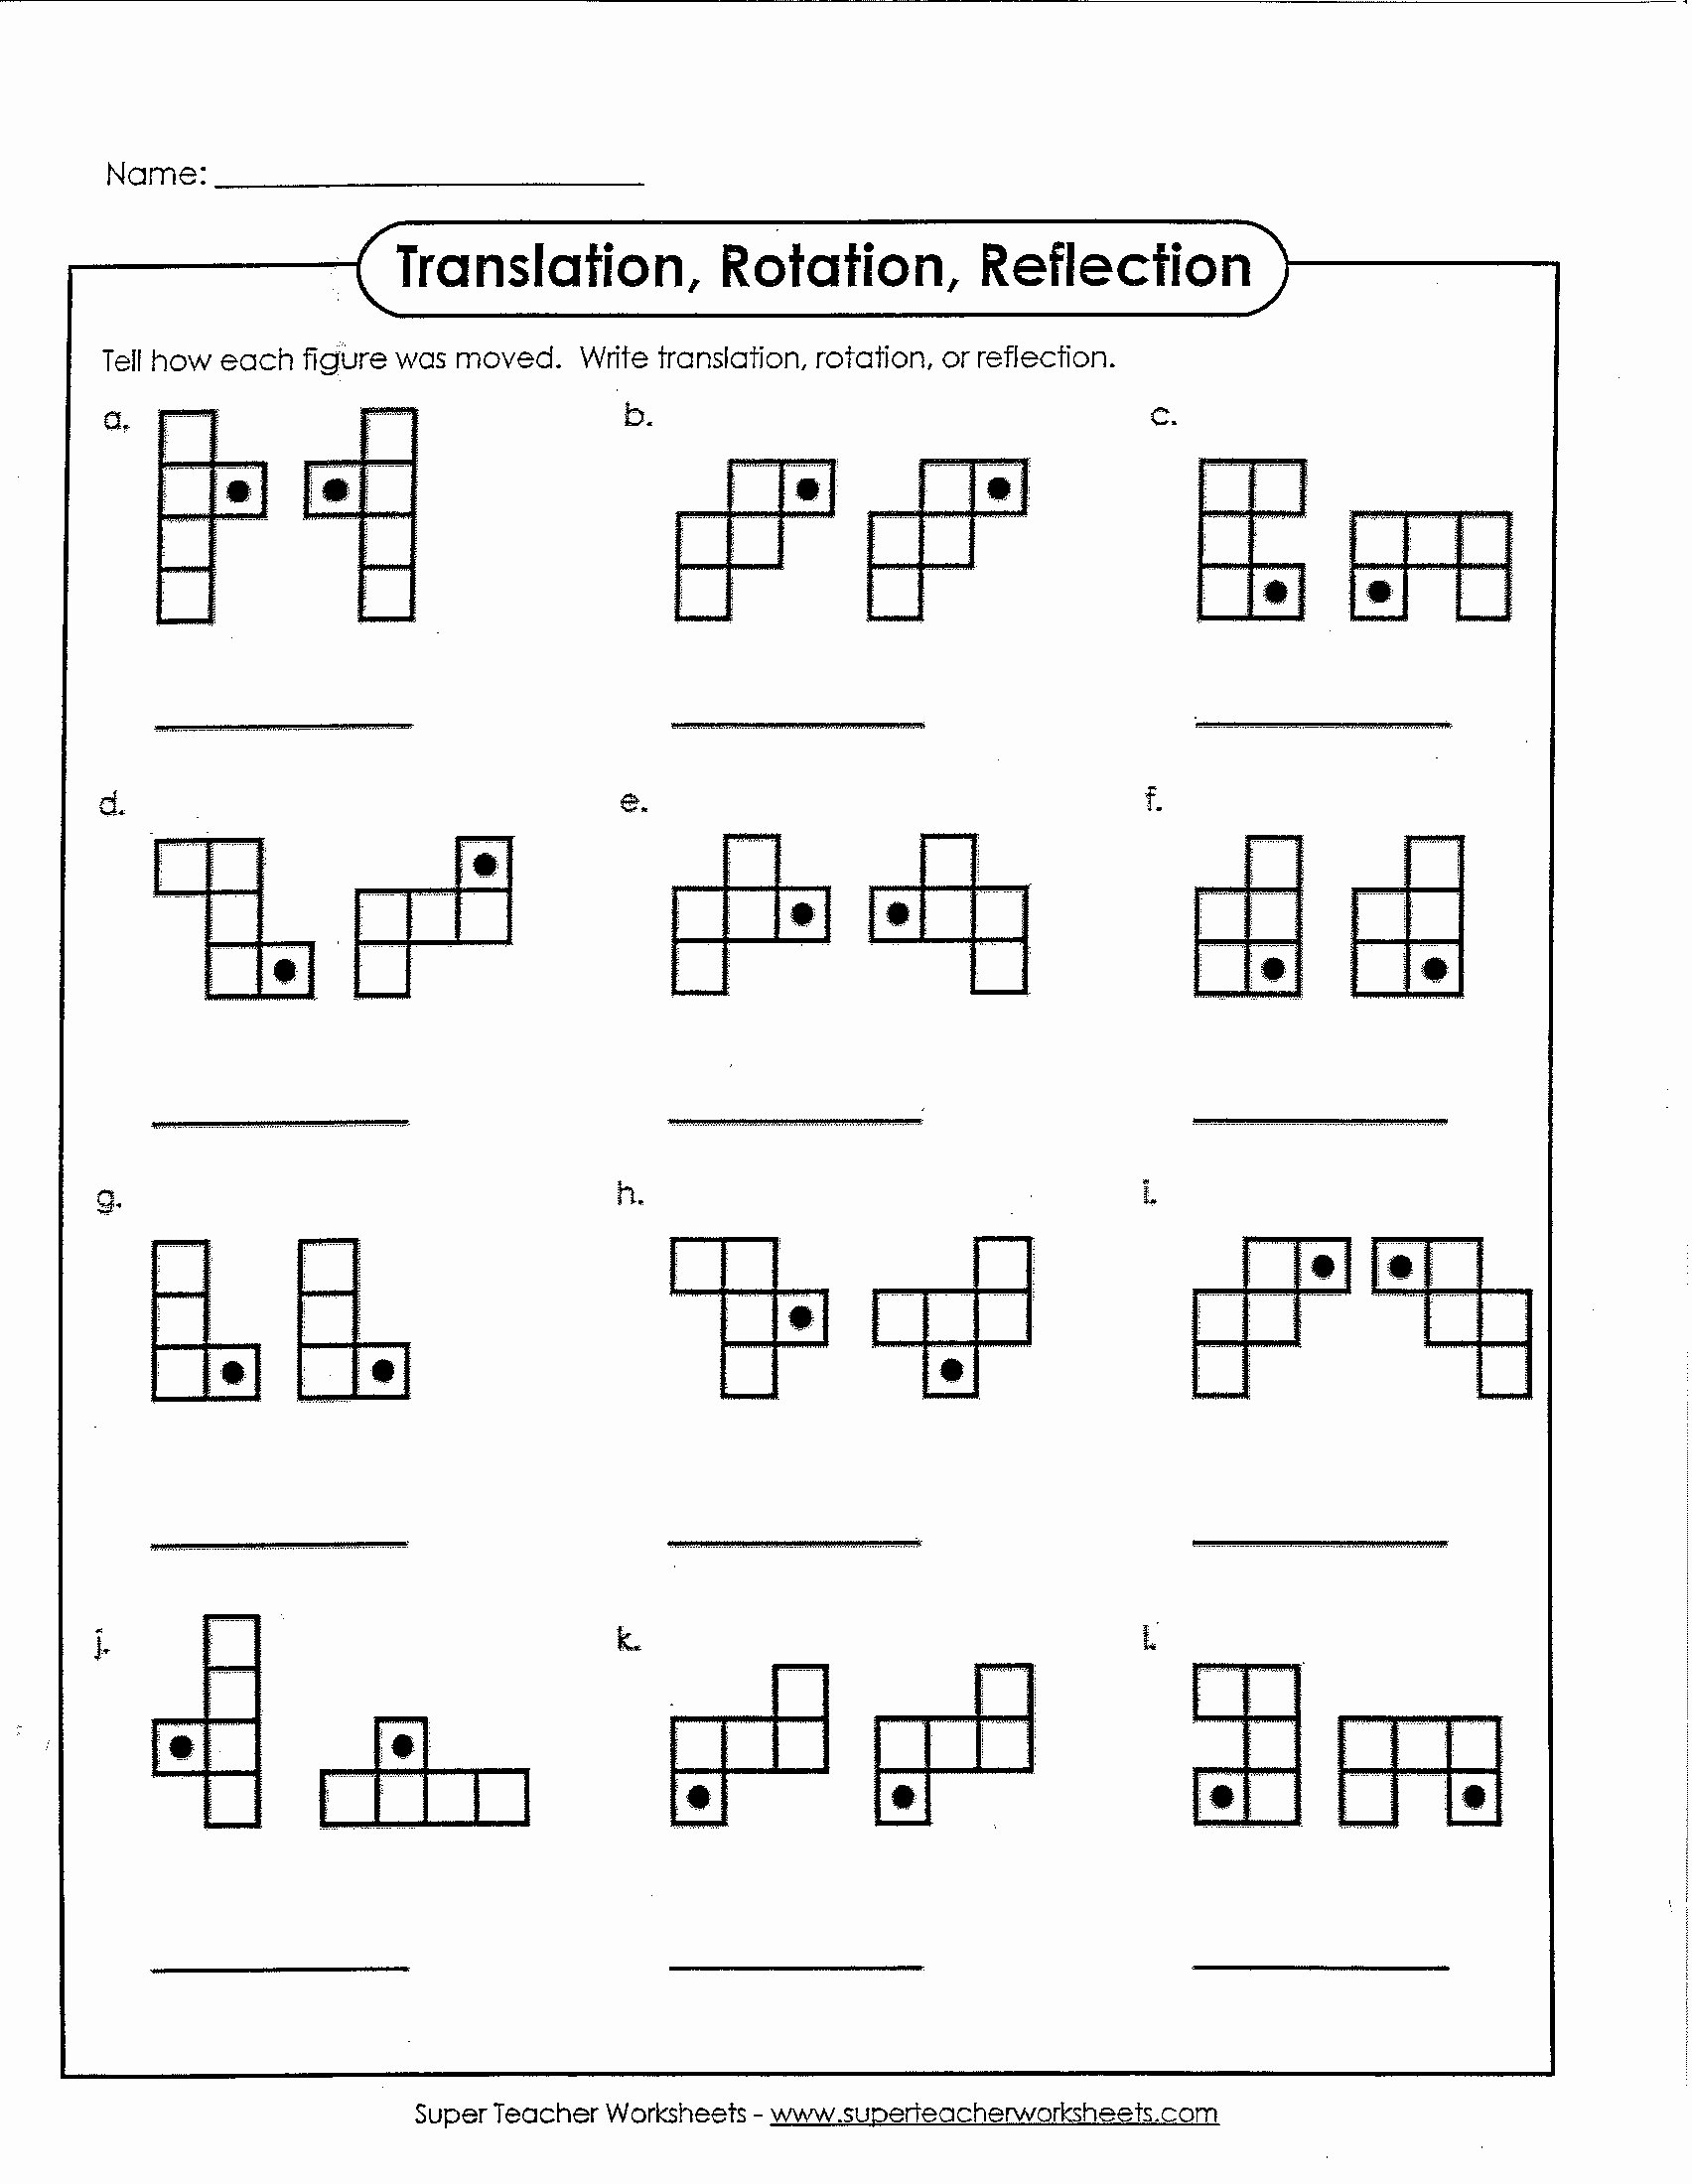 Translations Reflections and Rotations Worksheet Luxury Translation Rotation or Reflection – Math